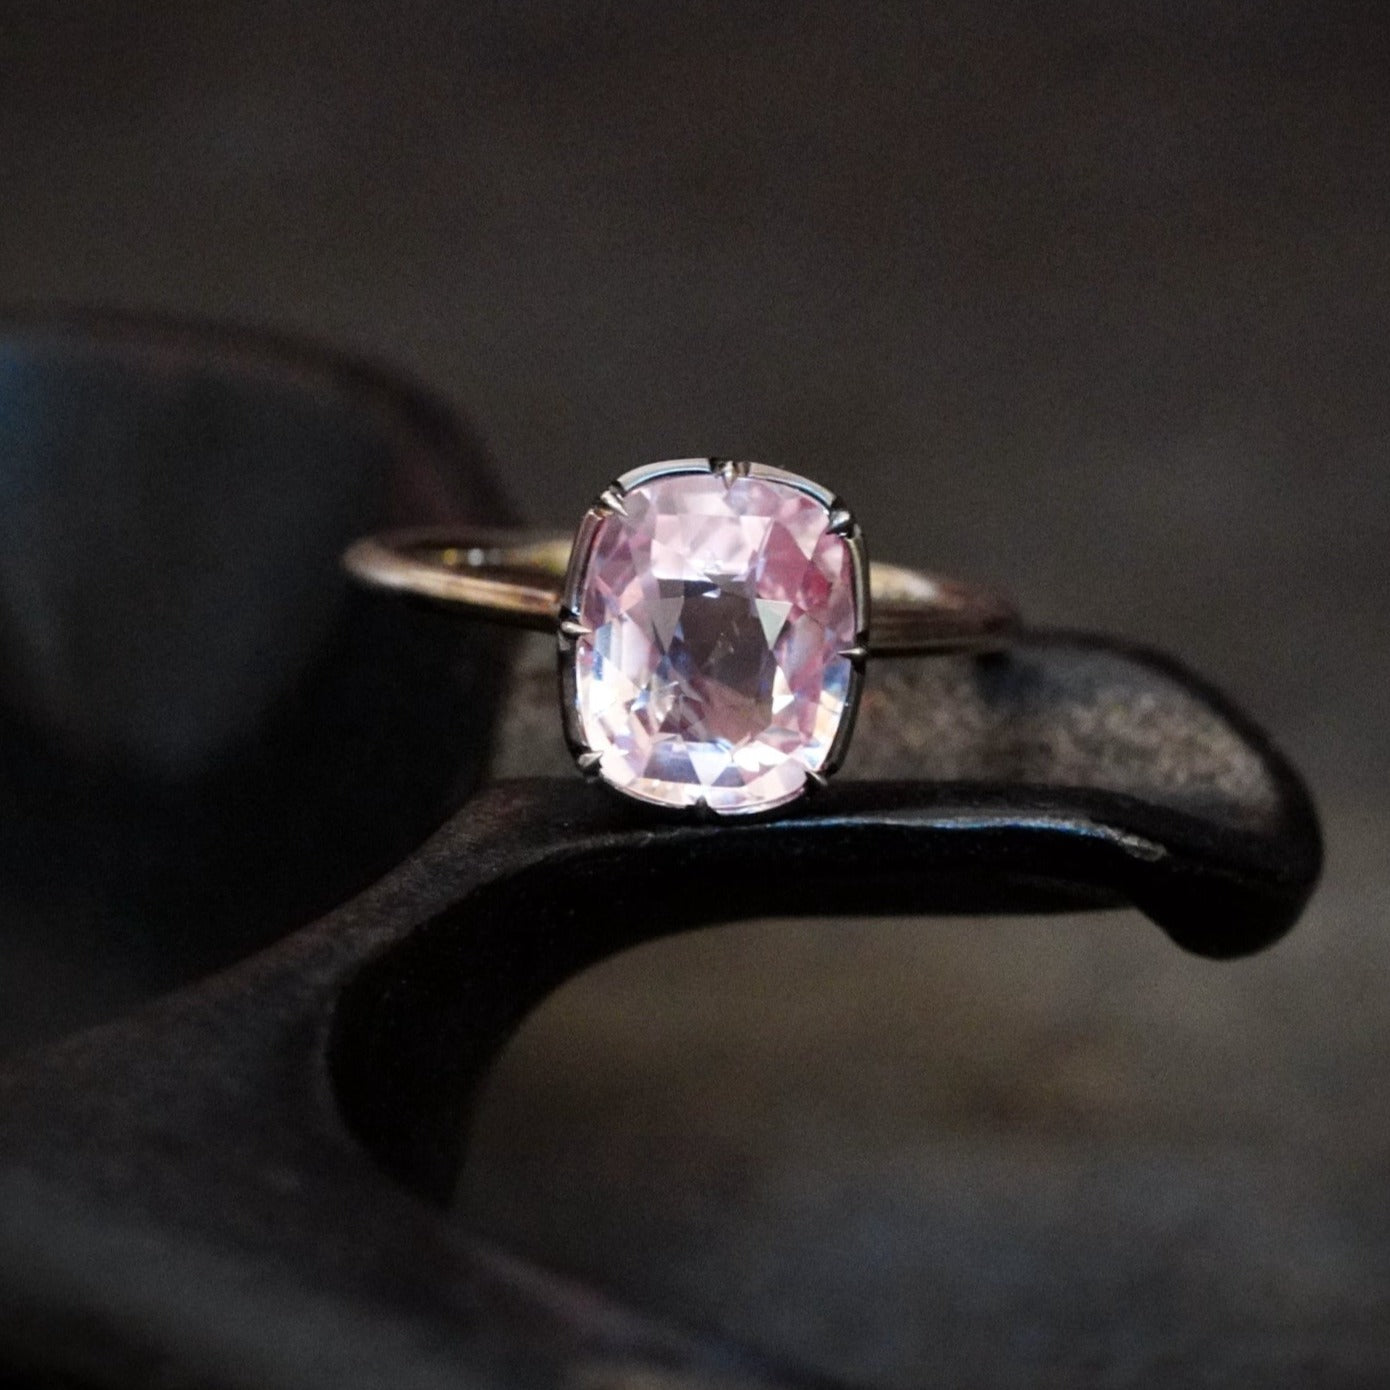 3.30 CT Cushion Padparadscha Sapphire in Dual-Tone Gold Ring